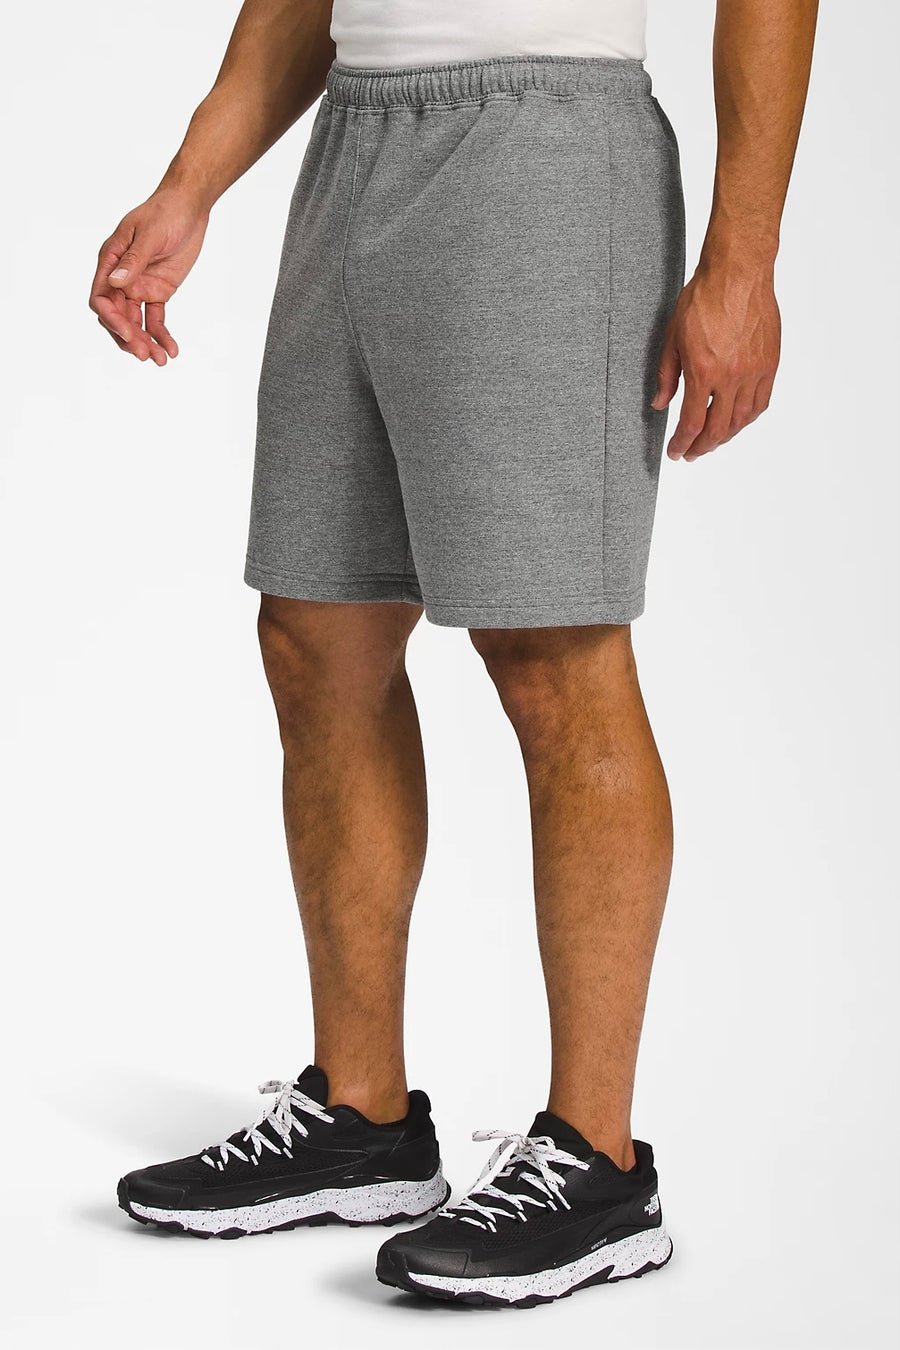 The North Face M's Heritage Patch Short